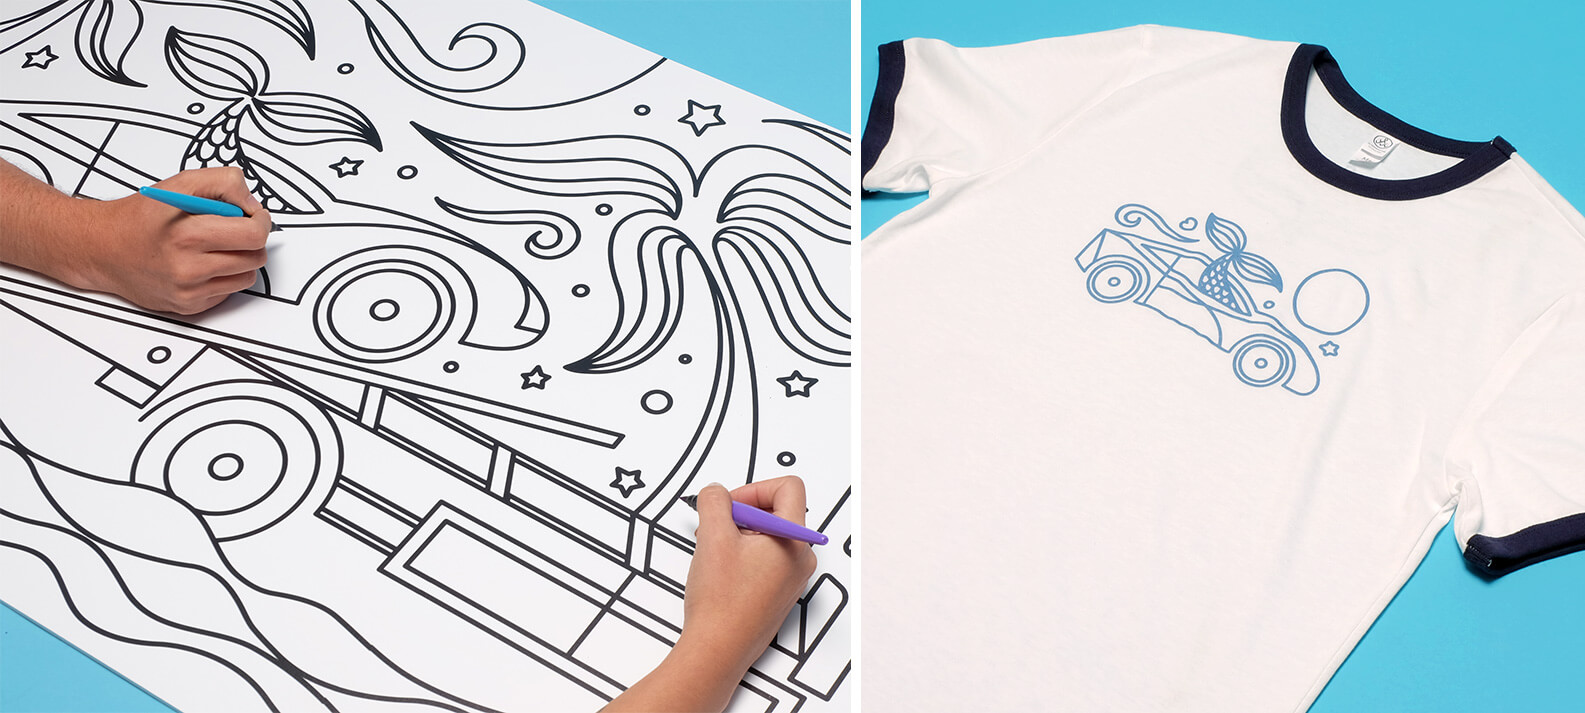 High Tides Miami Beach coloring book and tshirt by Jacober Creative